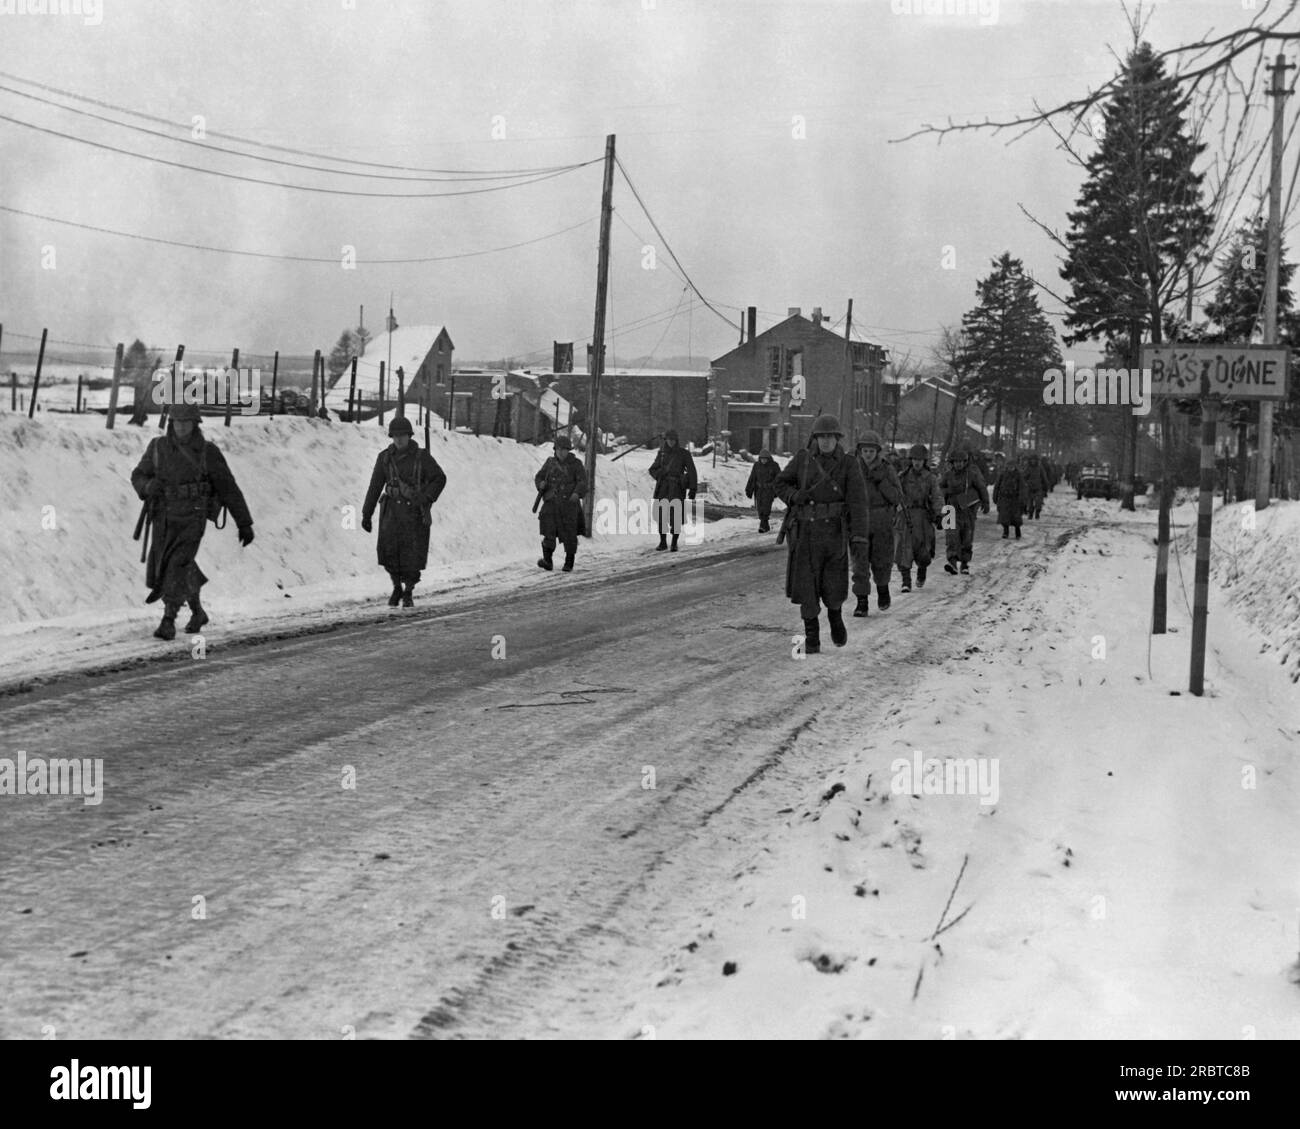 Bastogne, Belgium, December 29, 1944 Members of the 101st Airborne Division move out Bastogne to drive the Germans besieged them for ten days out of a neighboring town. American and German forces at the Belgian town of Bastogne, as part of the larger Battle of the Bulge. Stock Photo